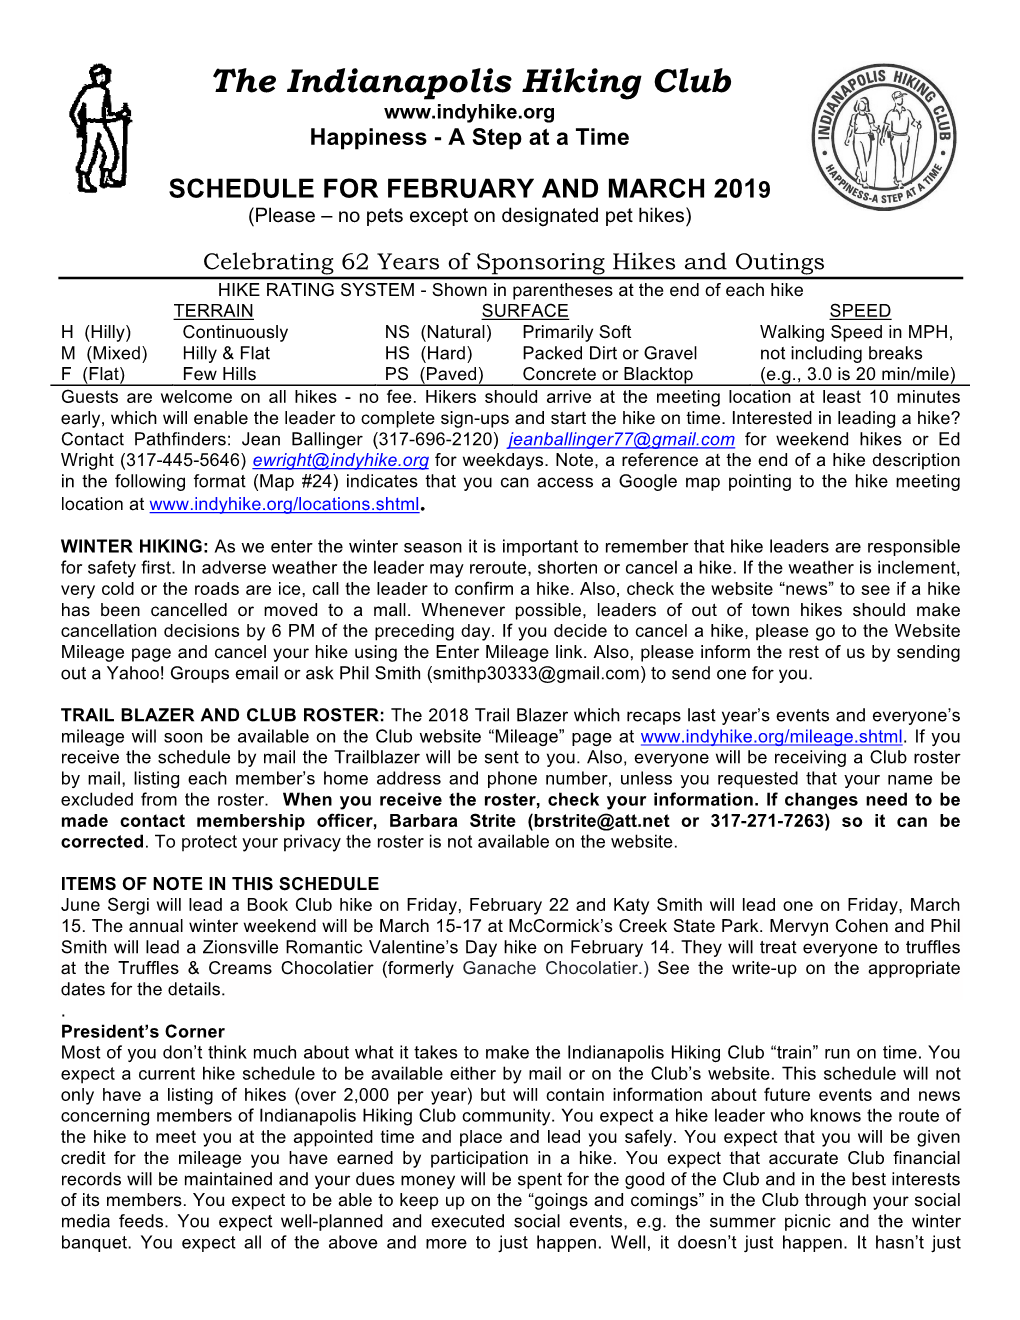 FEBRUARY and MARCH 2019 (Please – No Pets Except on Designated Pet Hikes)